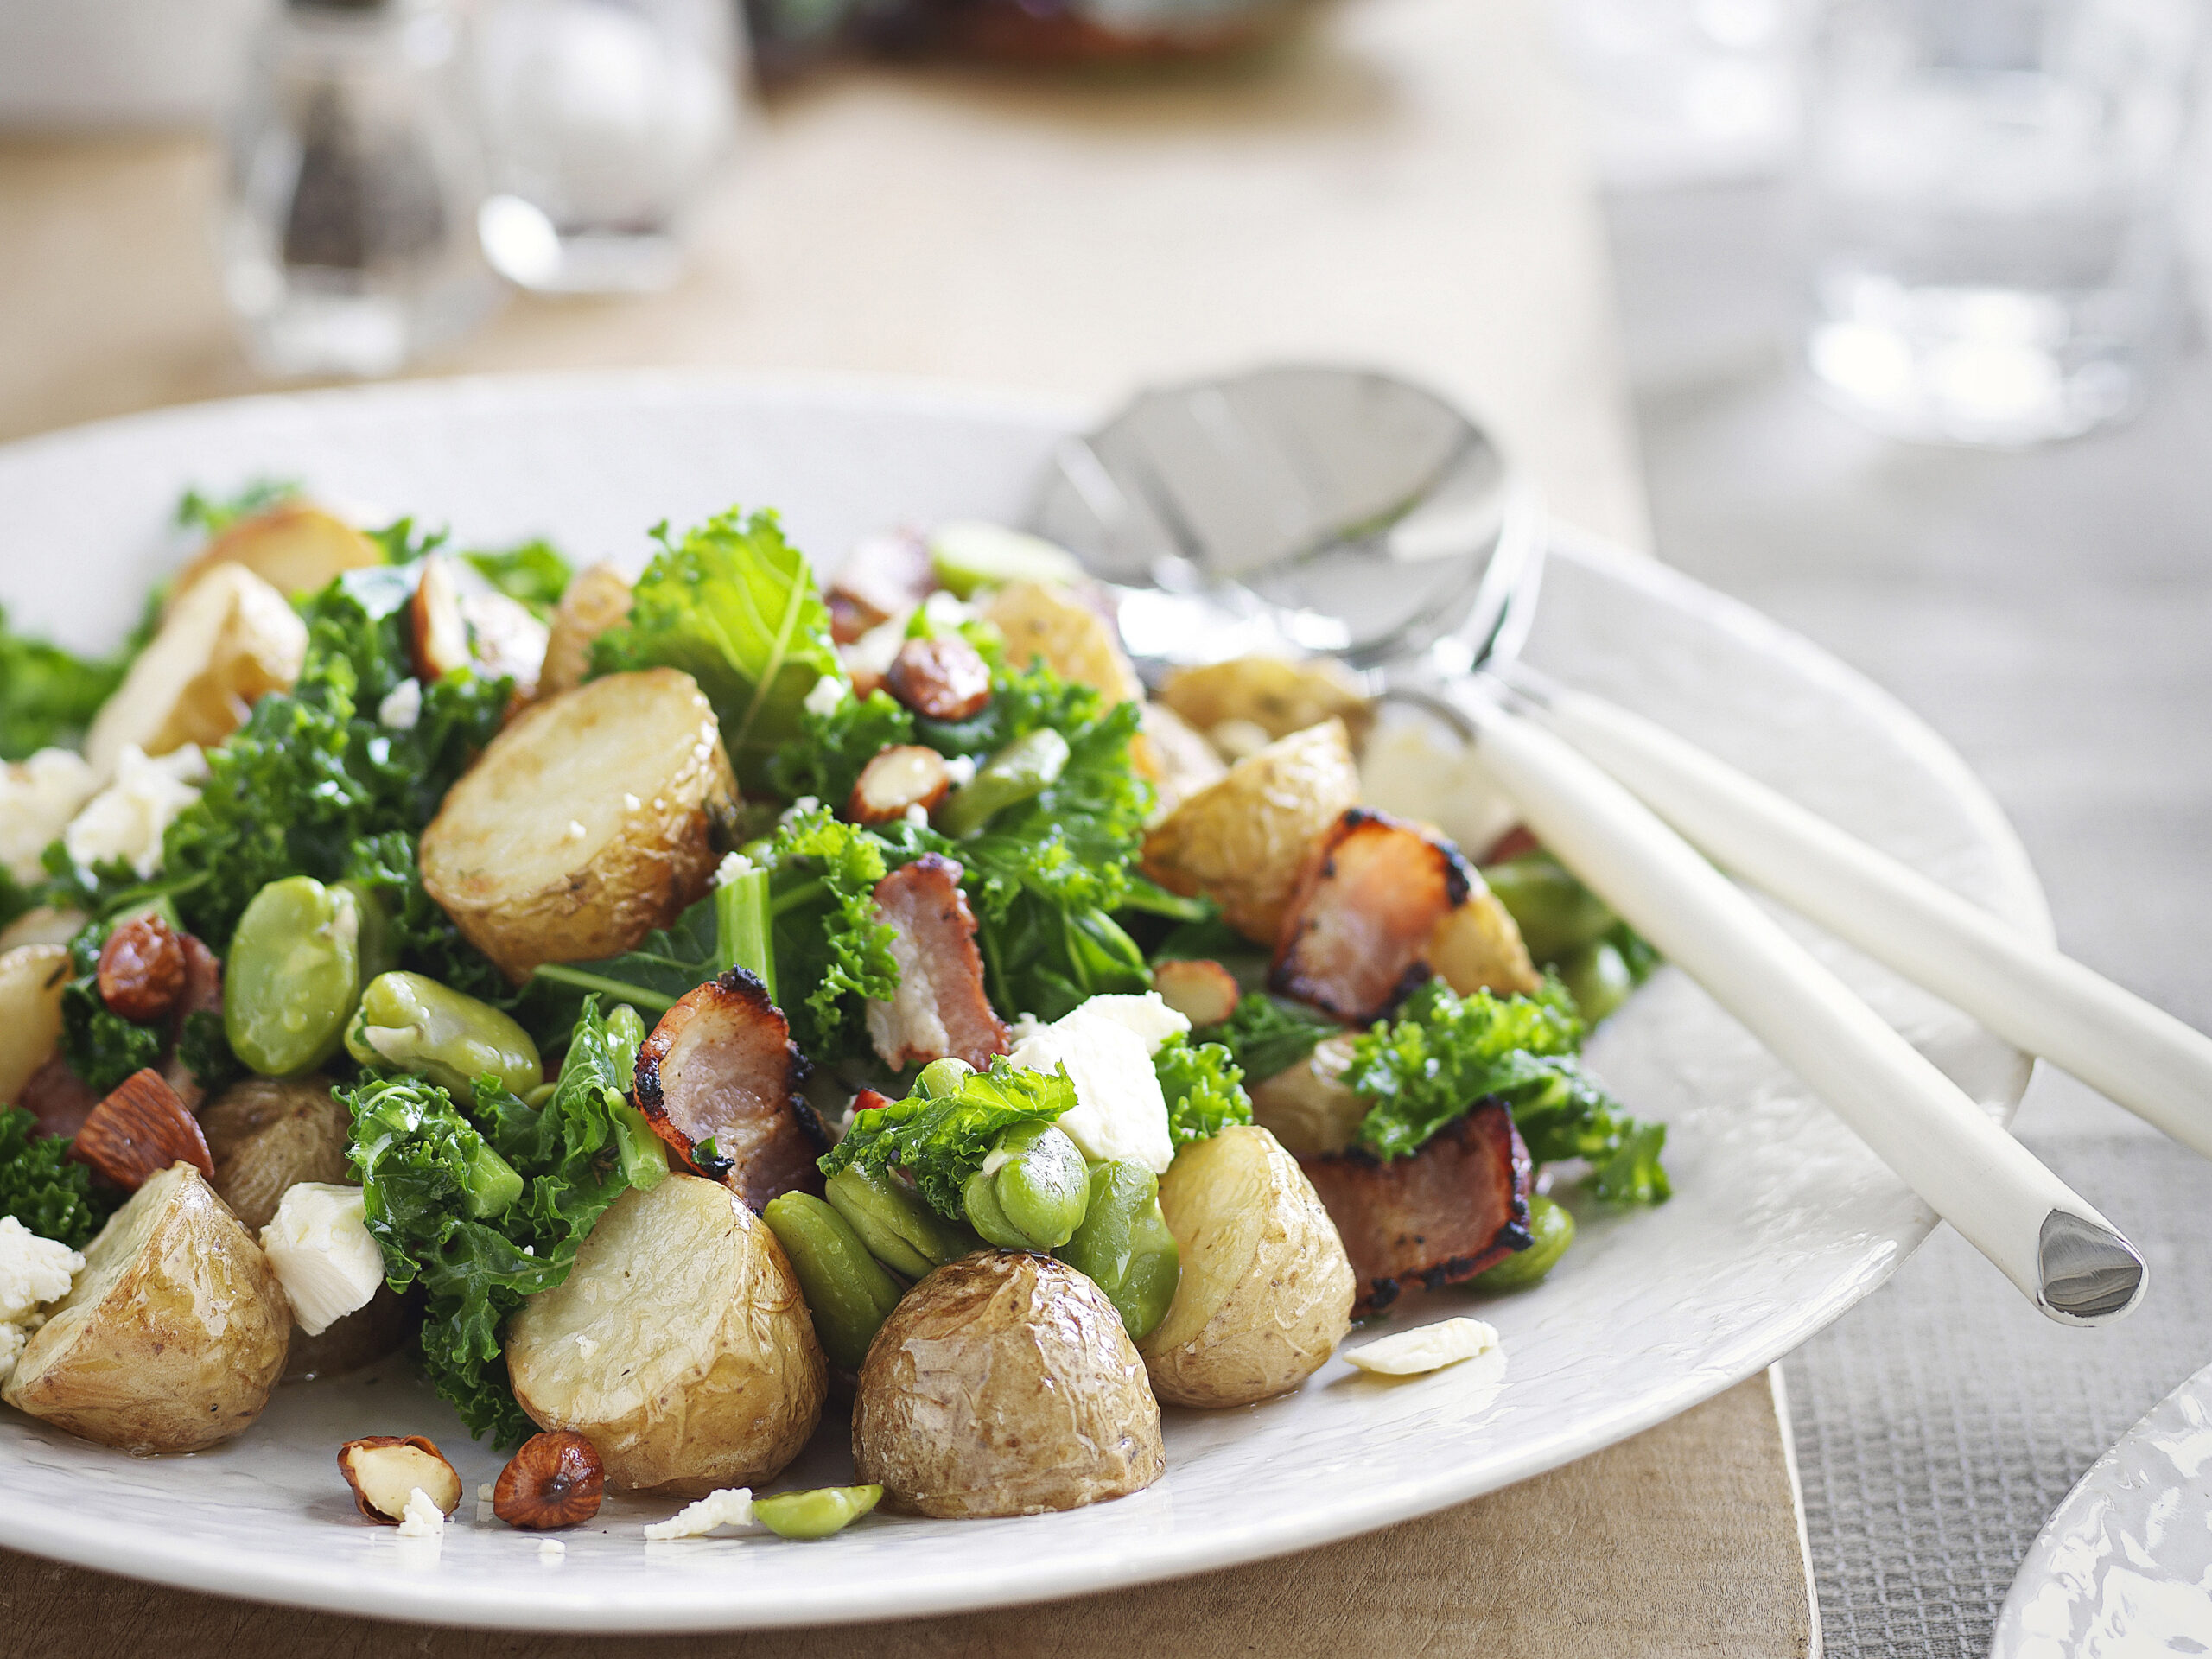 Warm potato and broad bean salad with bacon and feta